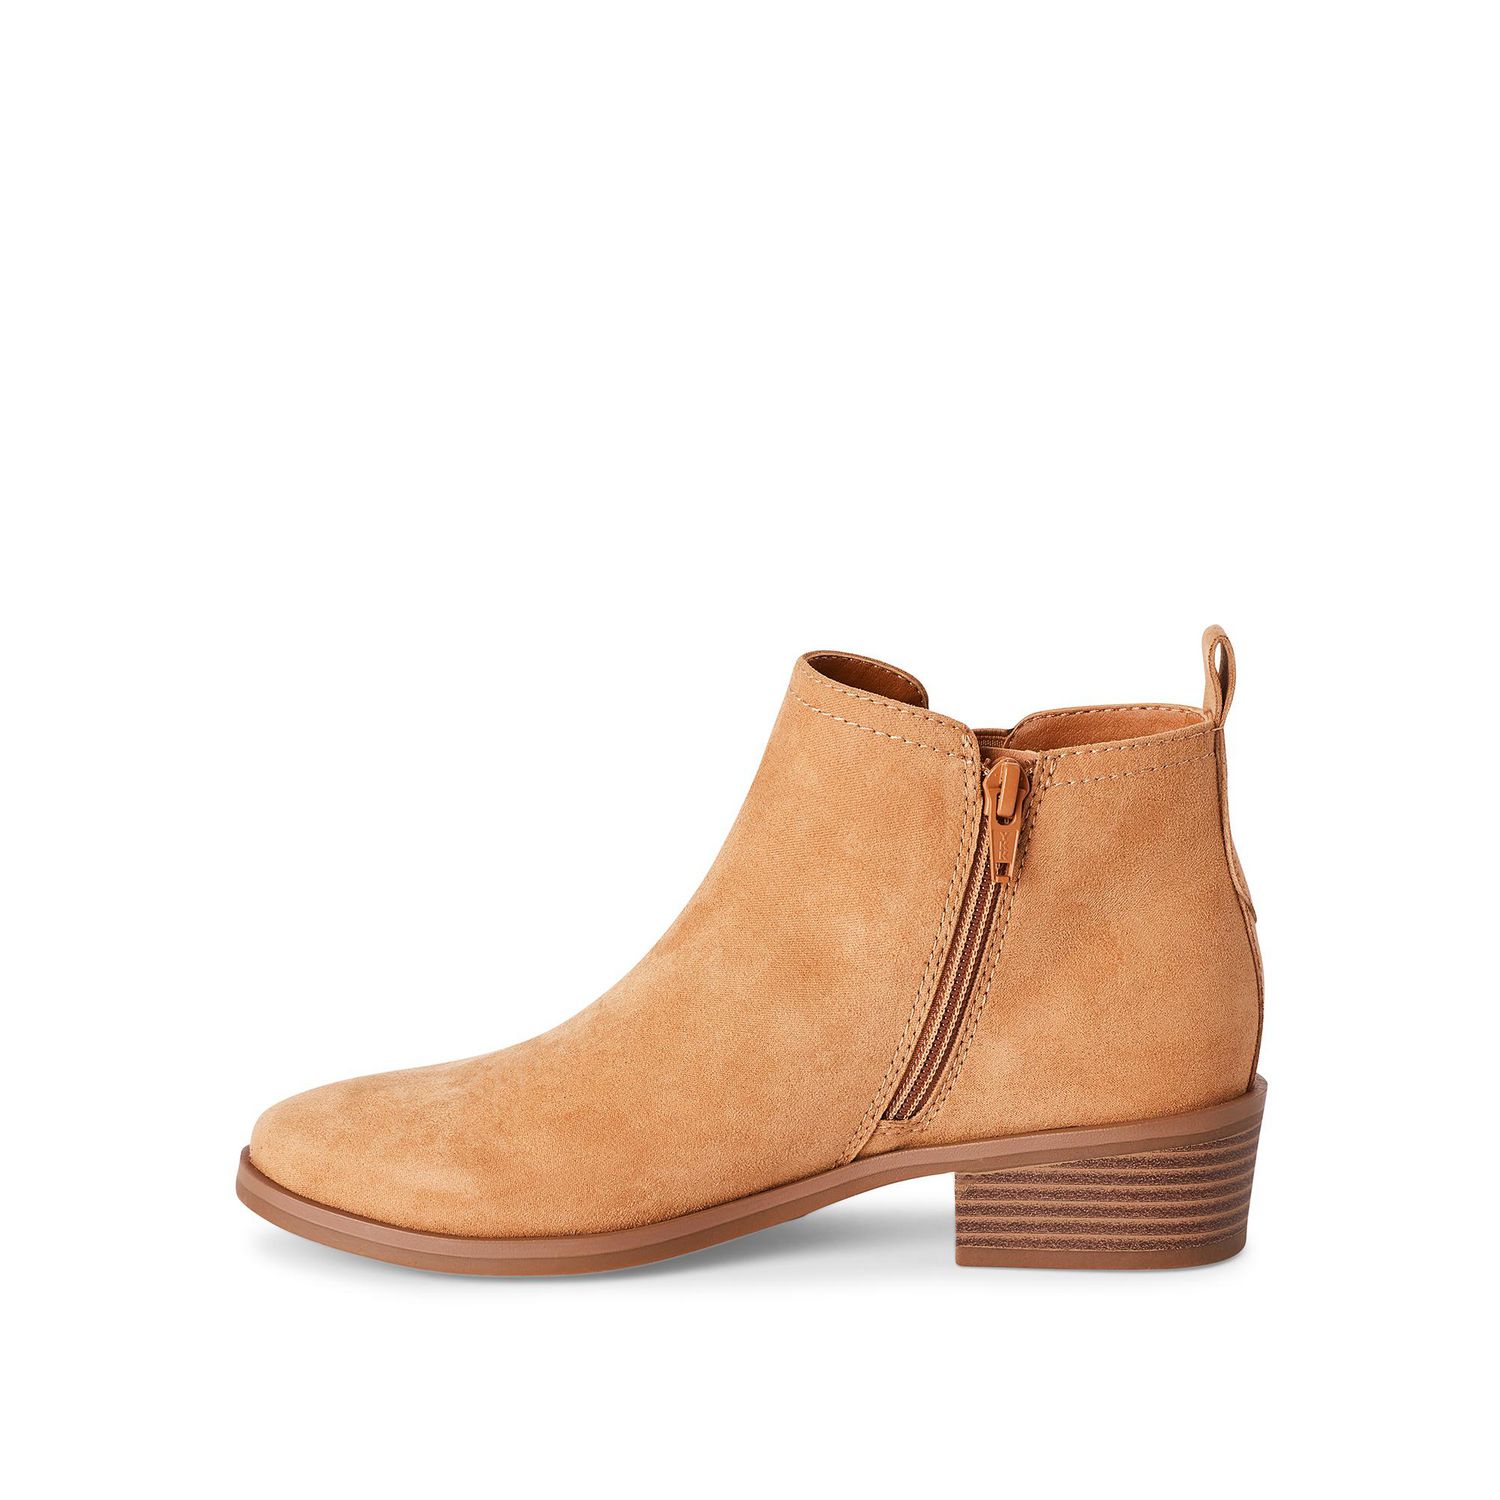 Time and Tru Women's West Boots